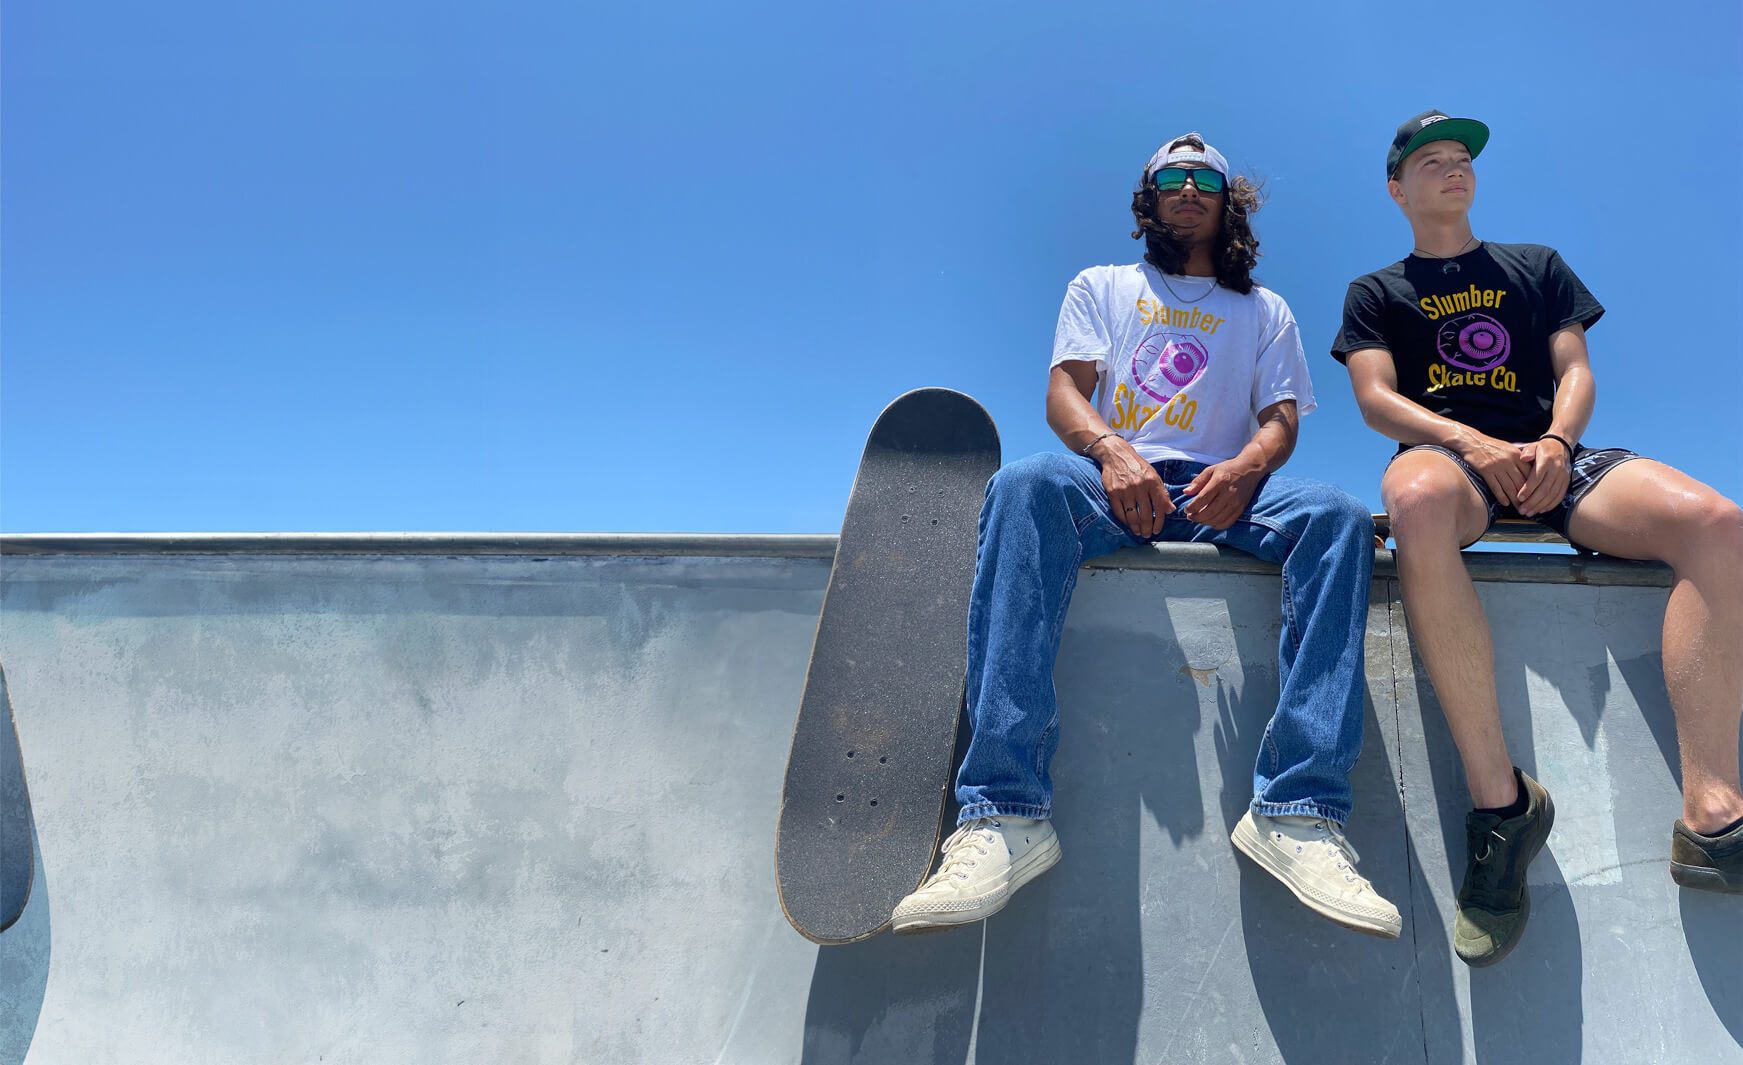 two young skateboarders sitting on edge of bowl looking away